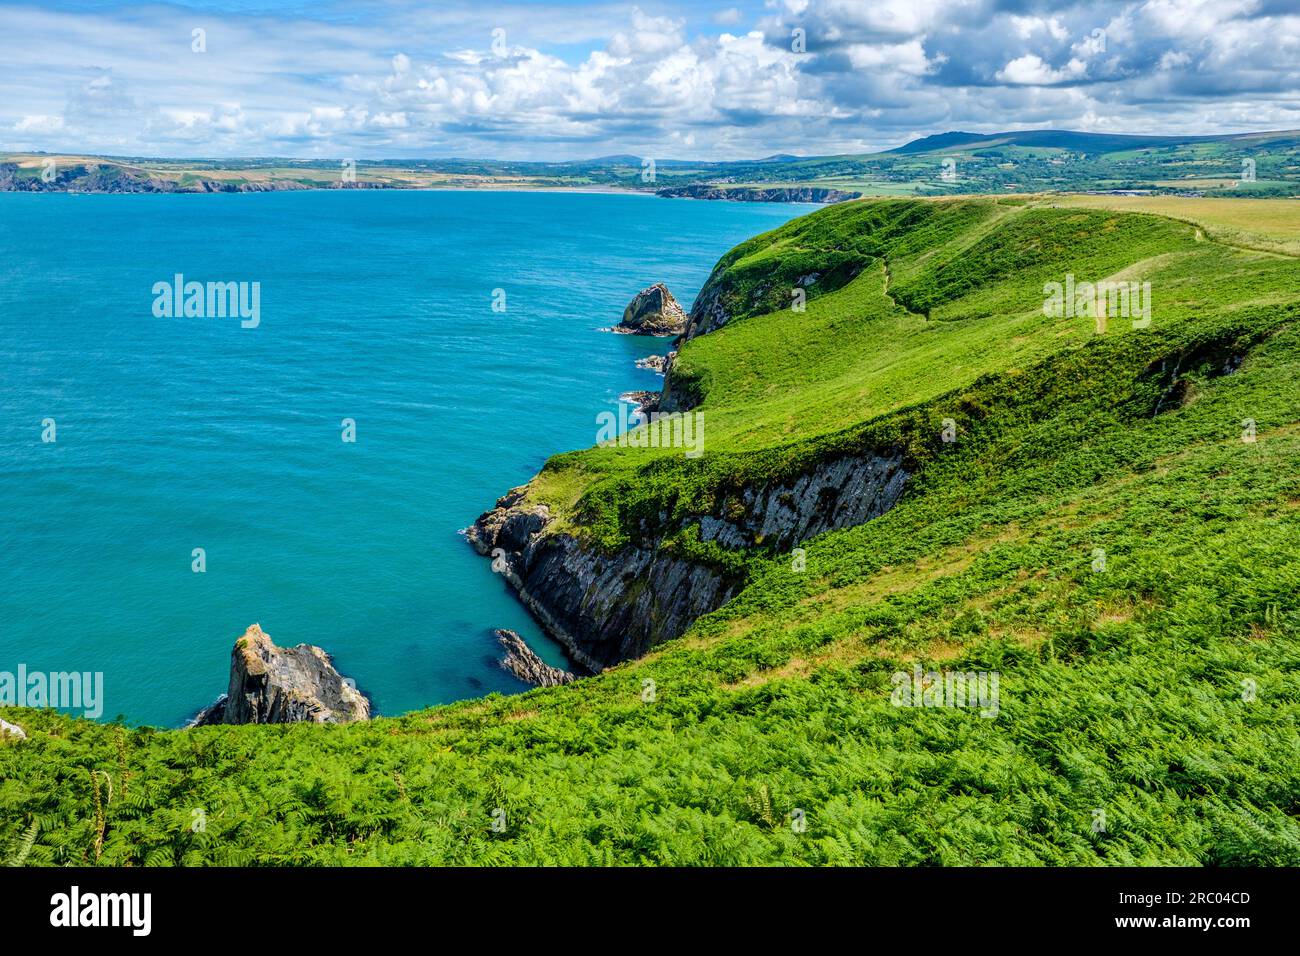 The Pembrokeshire Coast at Dinas Head with Carn Ingli and Newport in the distance, Wales, UK Stock Photo